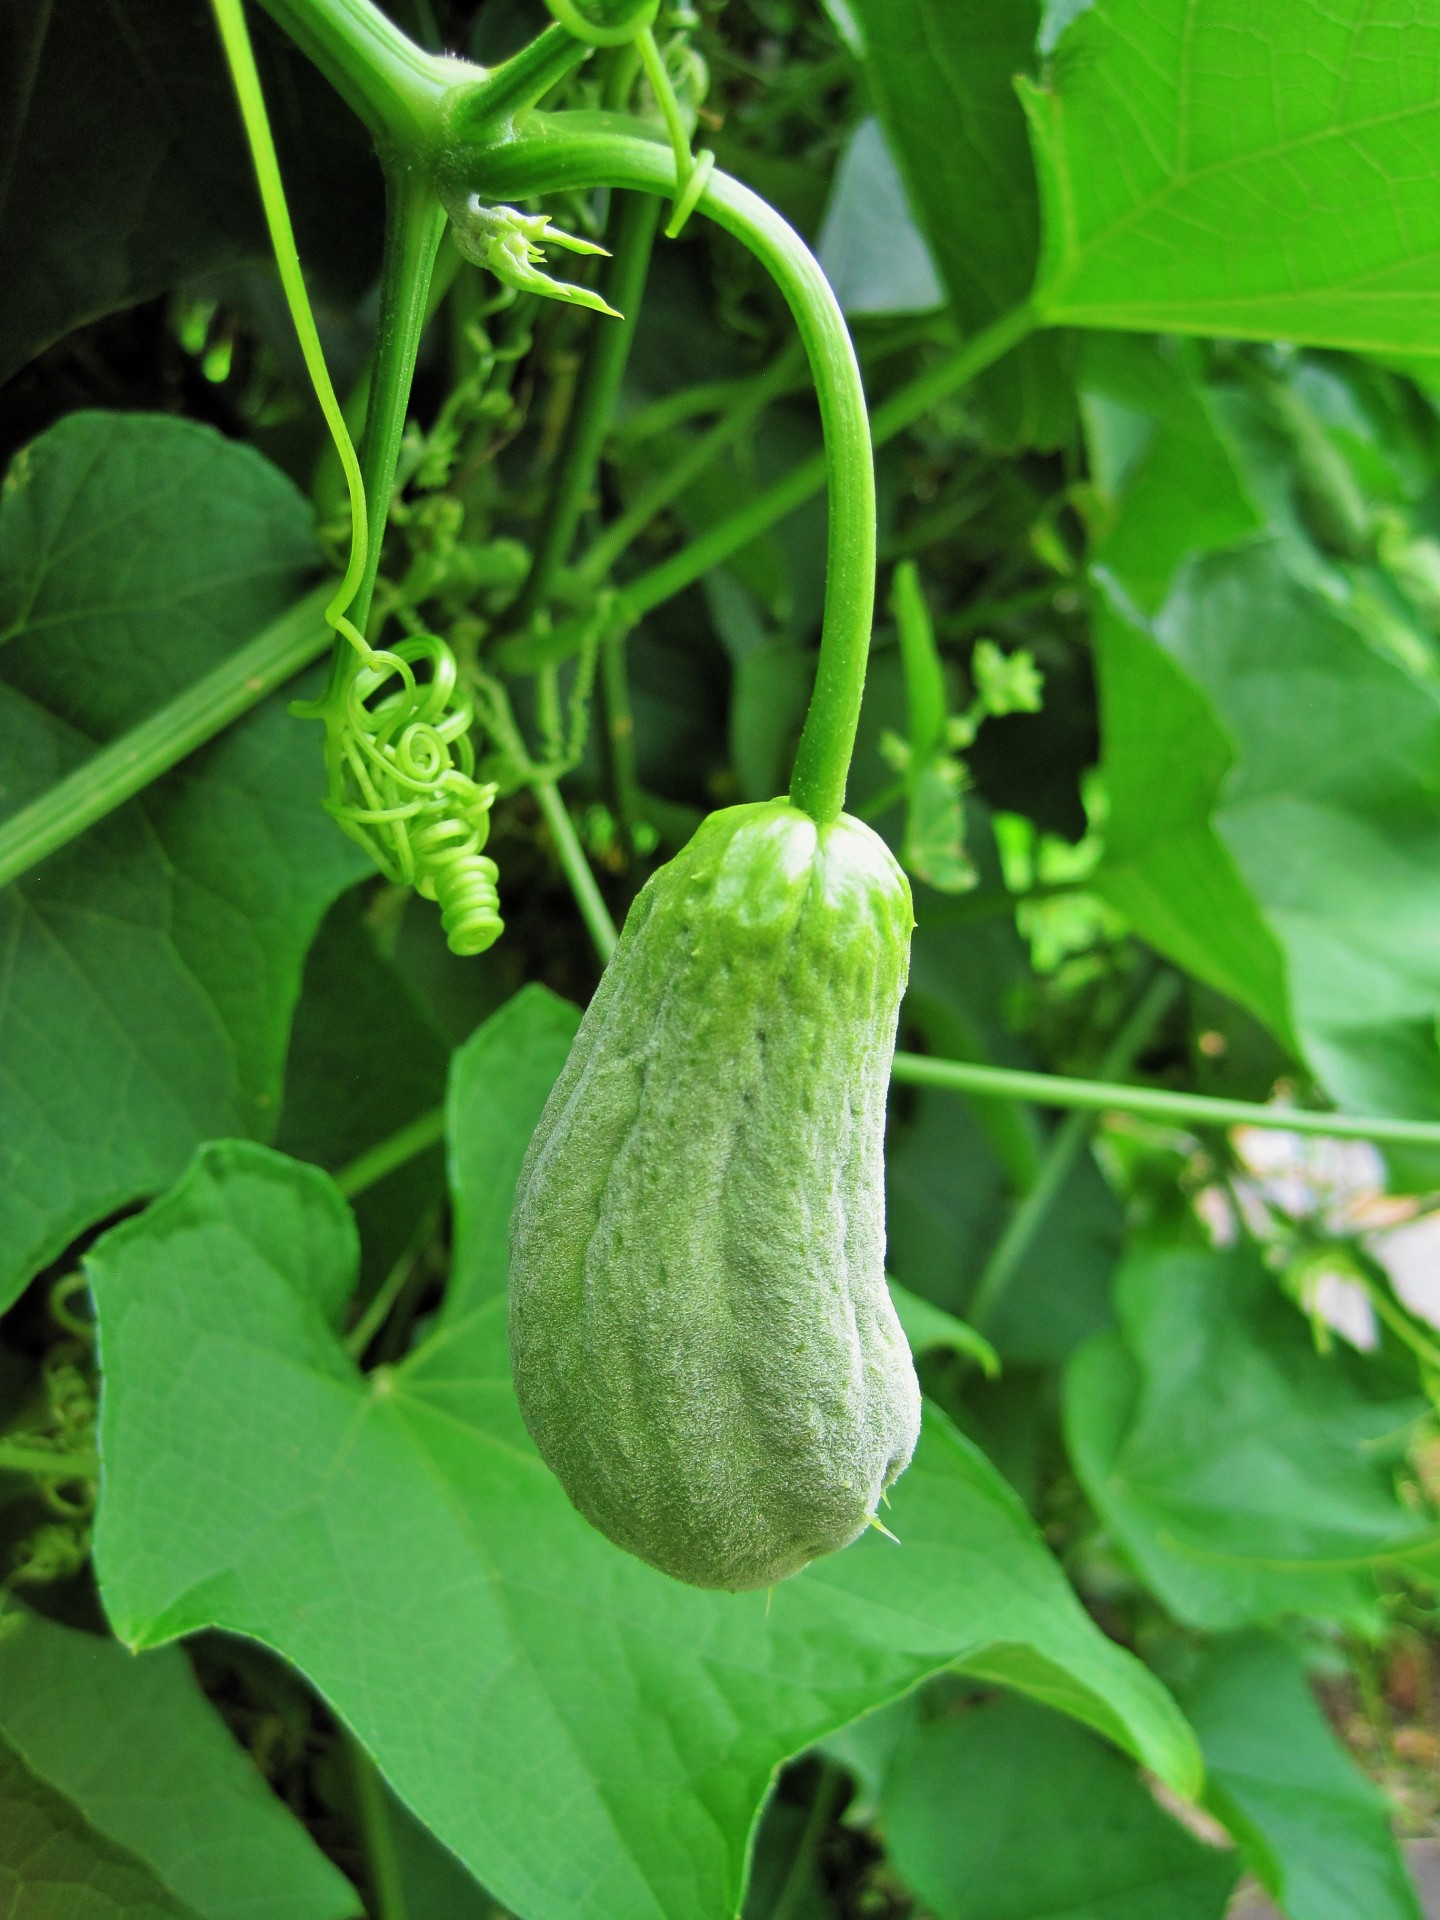 Young Squash On The Vine